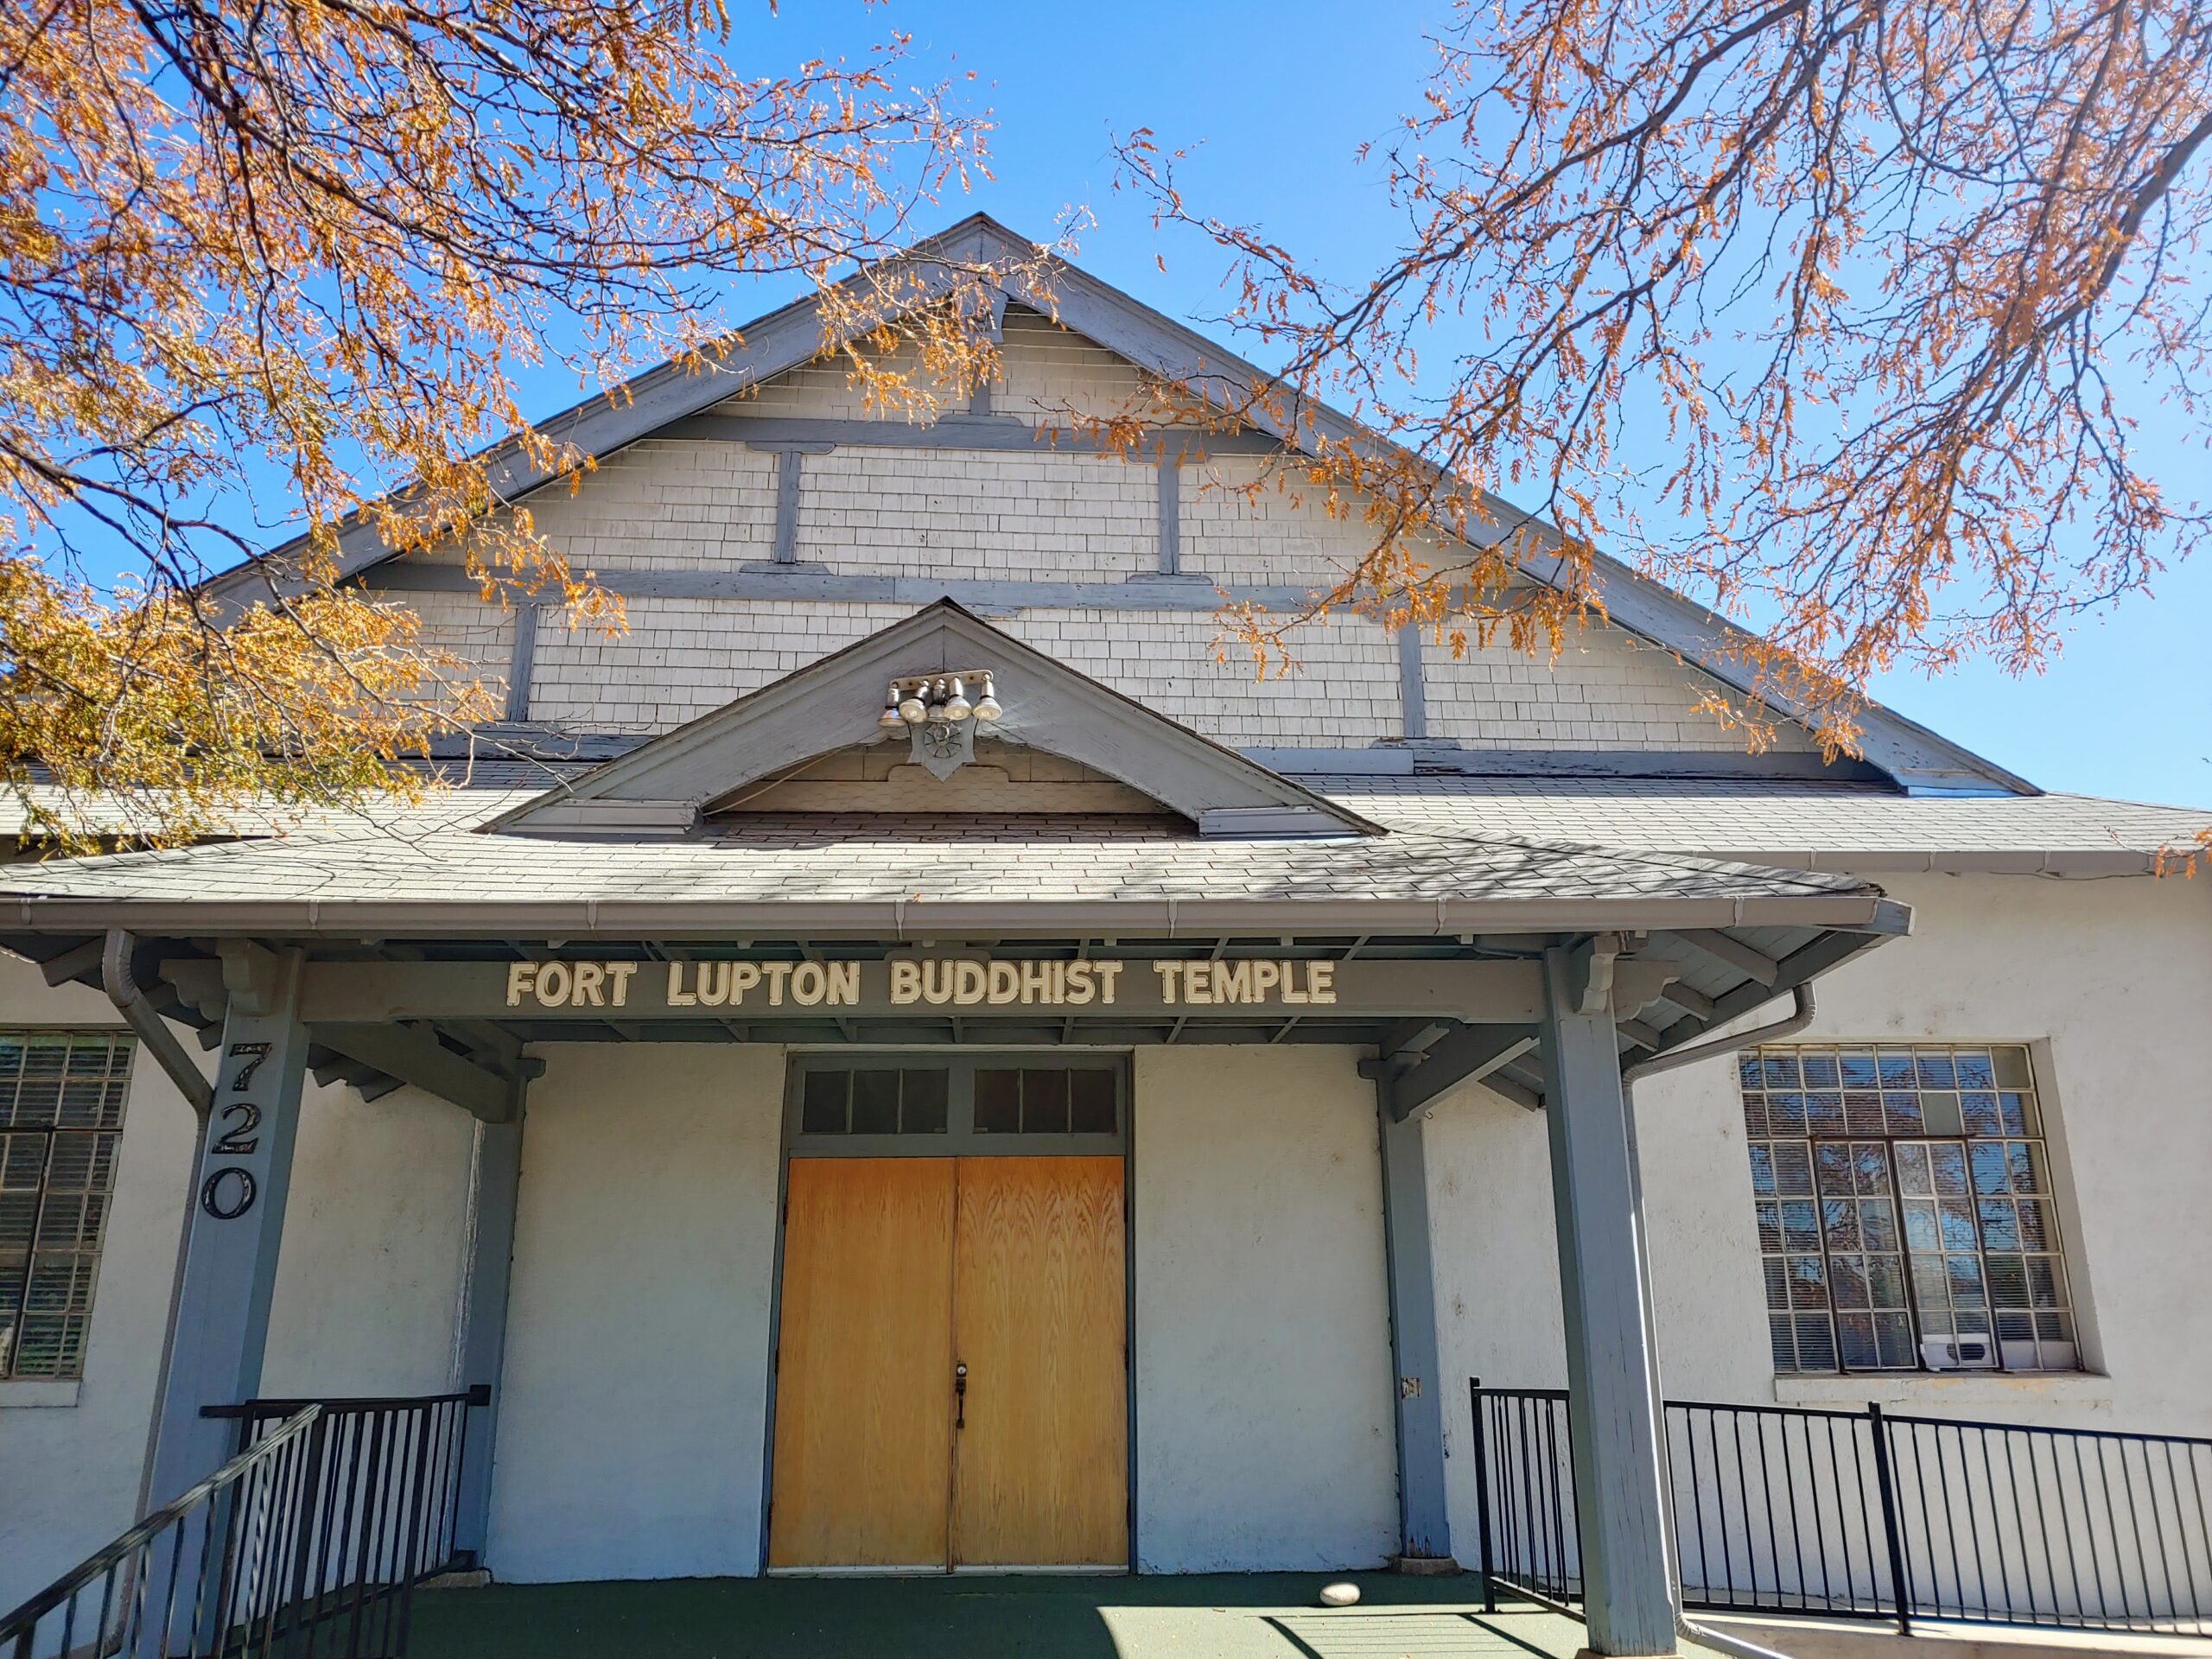 The Fort Lupton Buddhist Temple